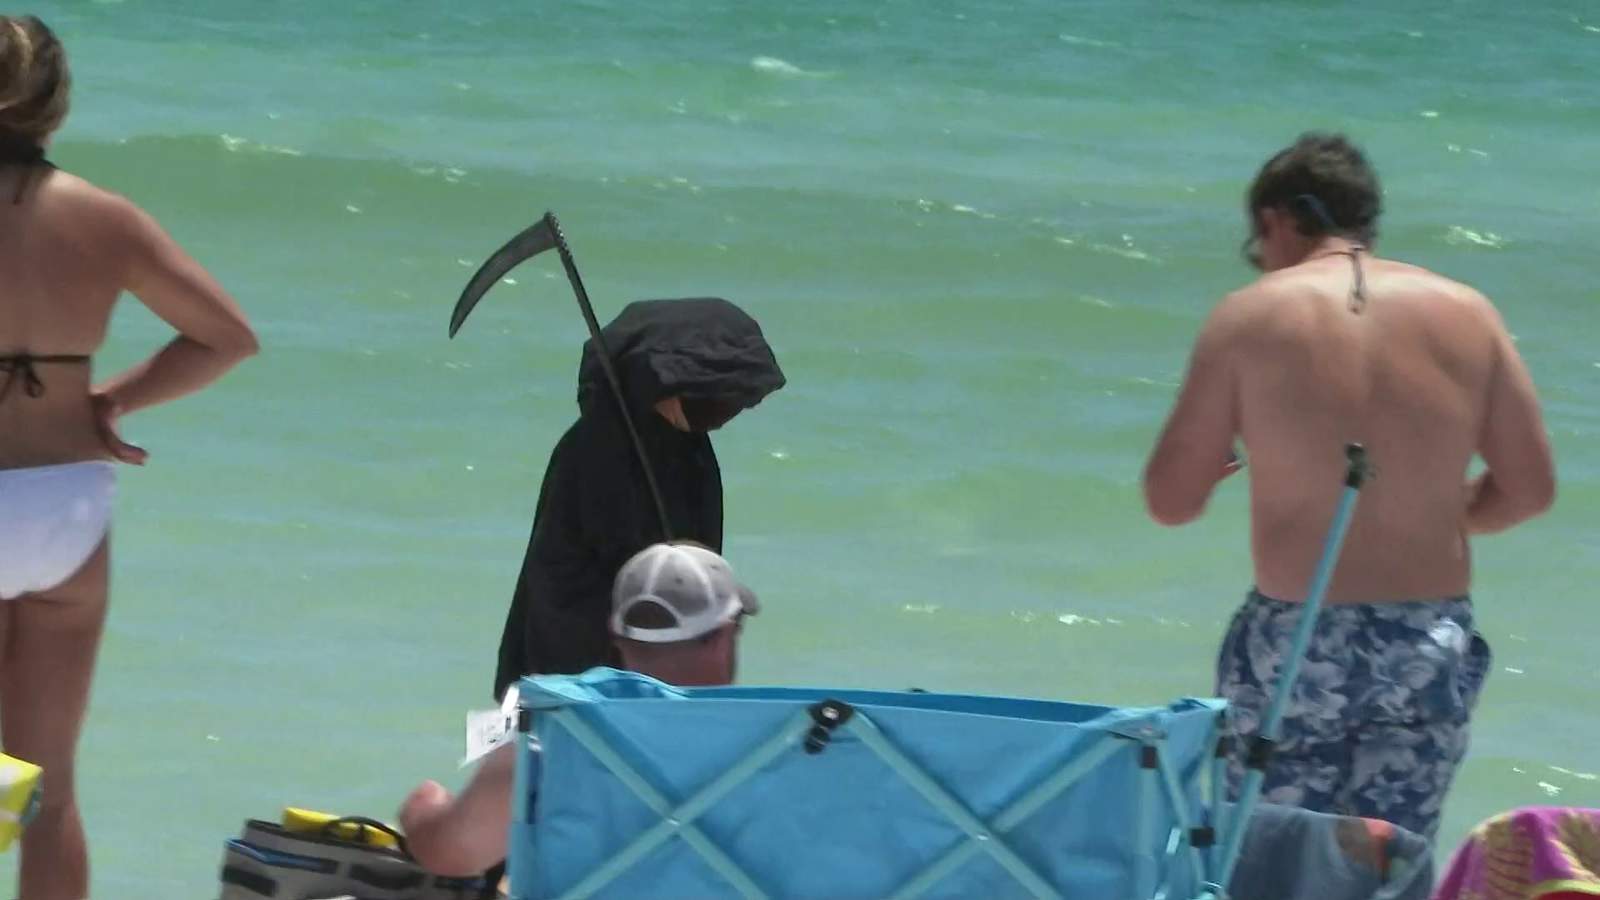 Lawyer known for dressing up as Grim Reaper is taking his message to Jax Beach